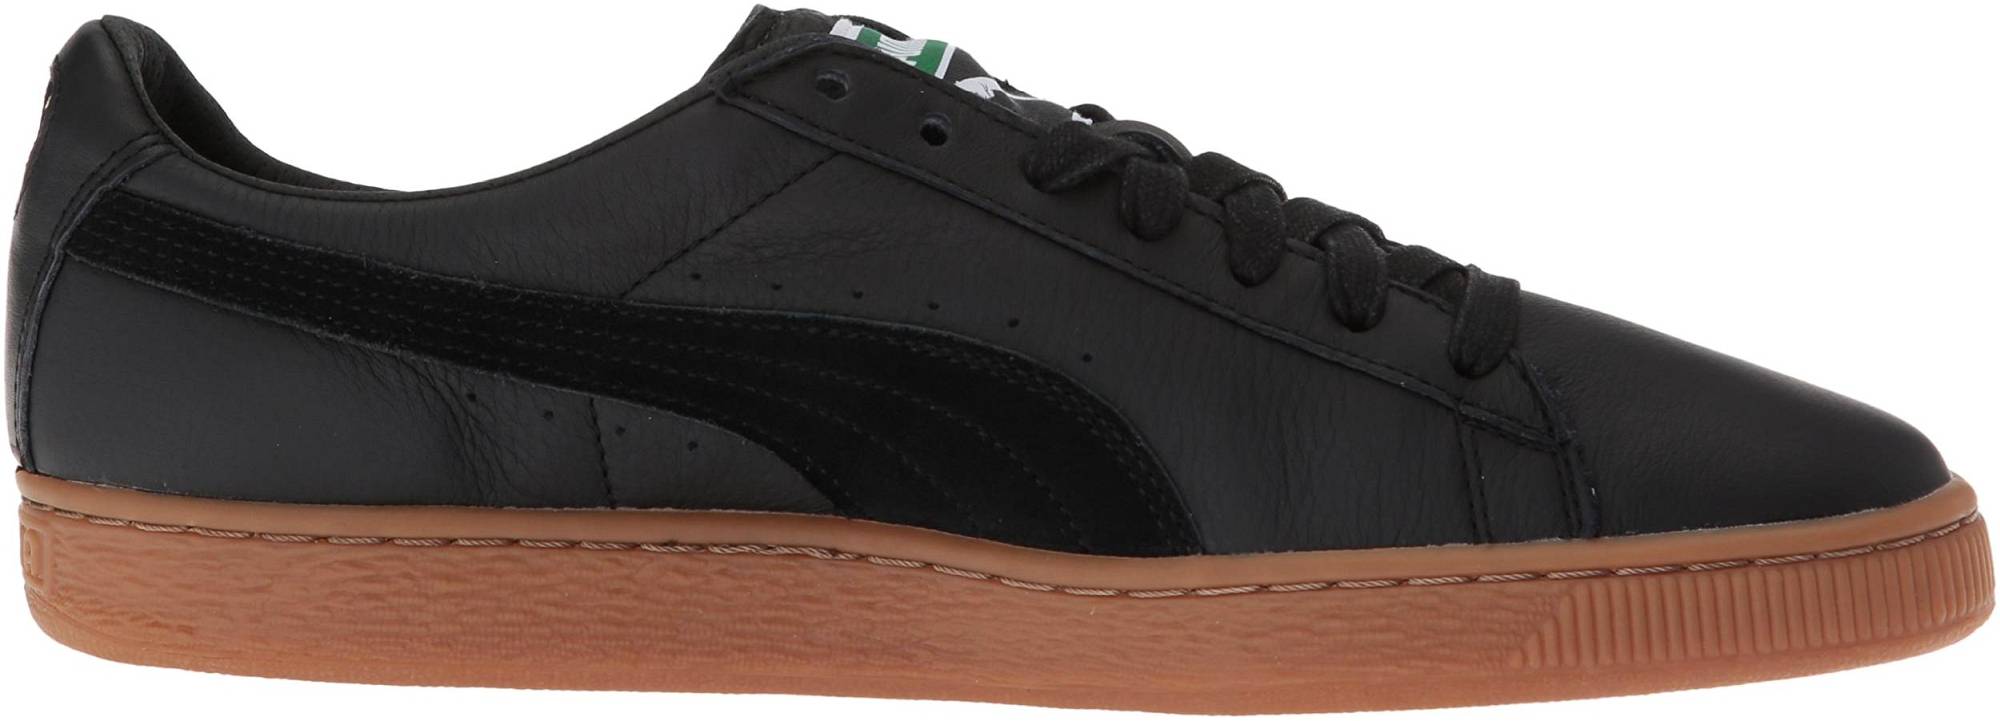 Puma Basket Classic Gum Deluxe – Shoes Reviews & Reasons To Buy